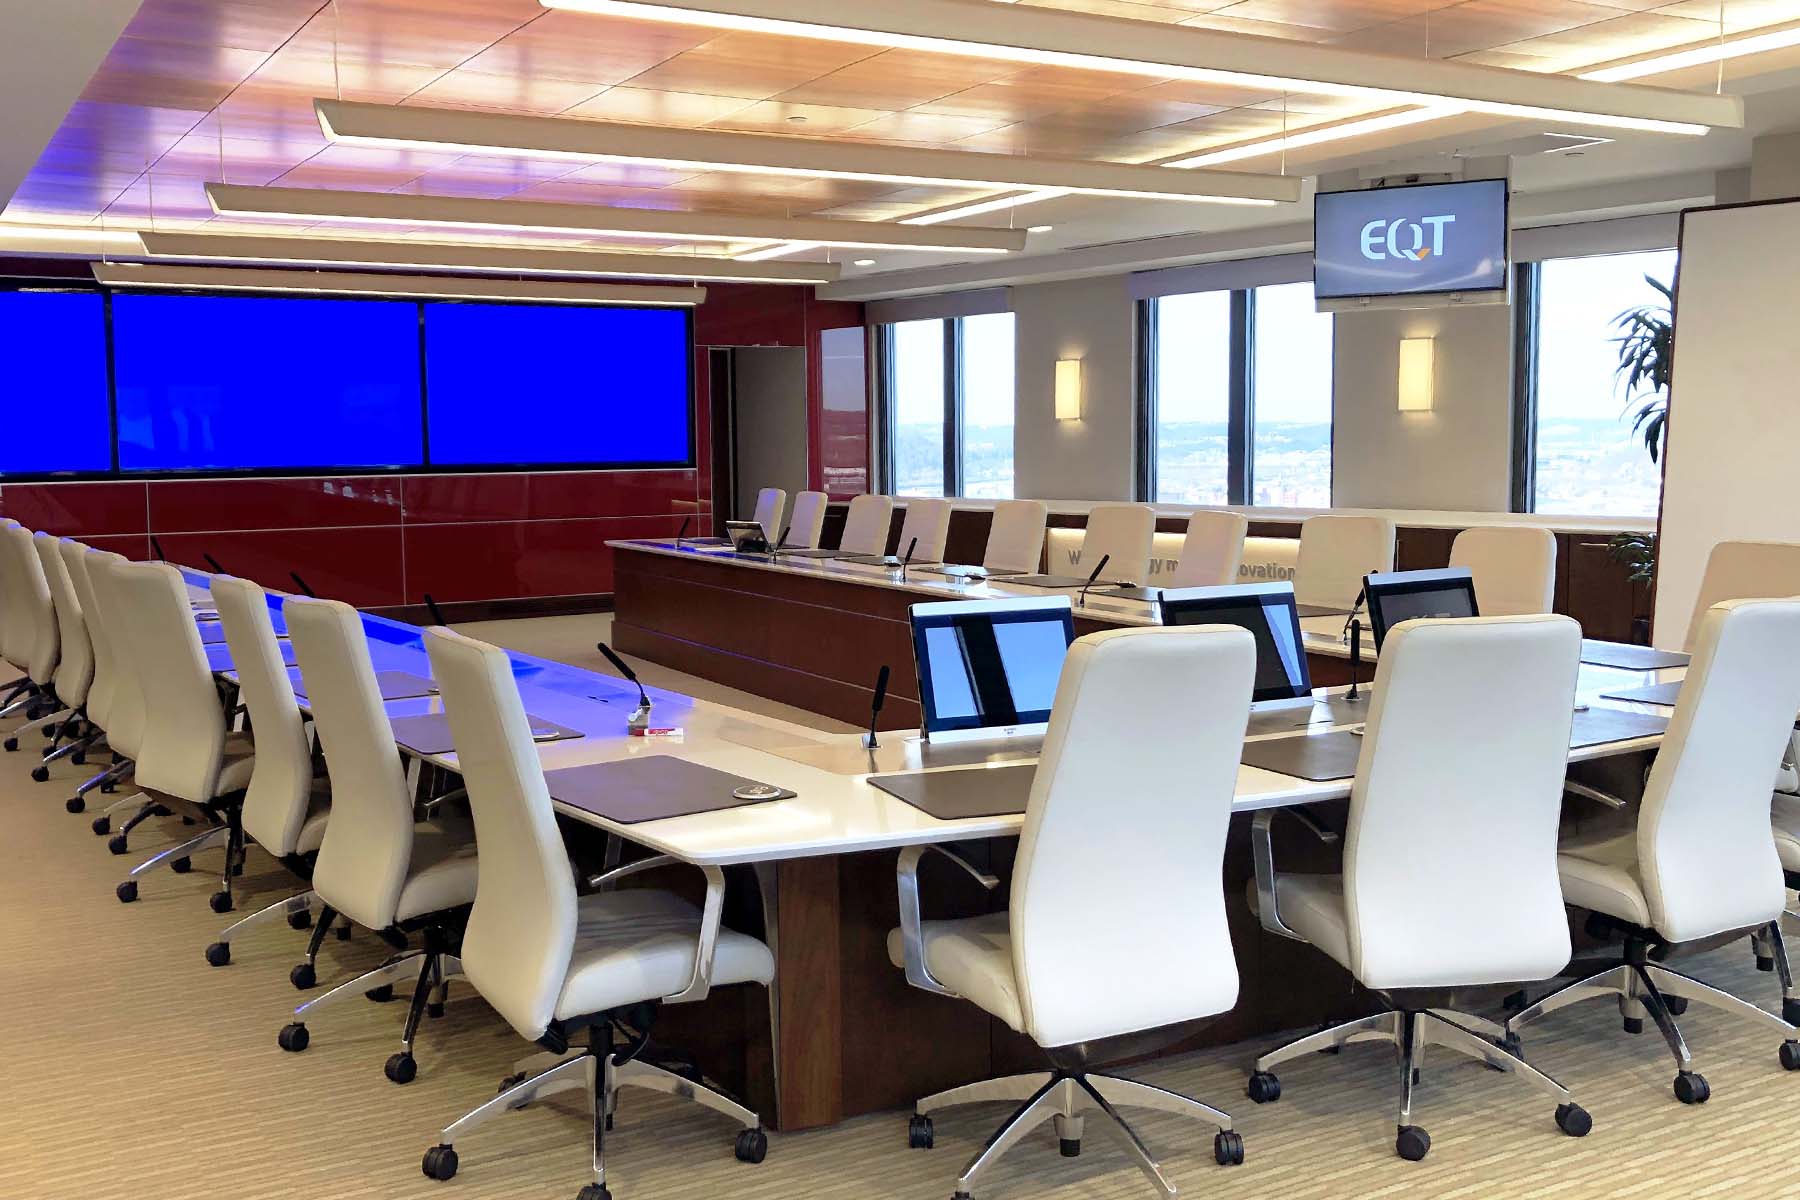 Conference room with TV displays and large U-shaped conference table